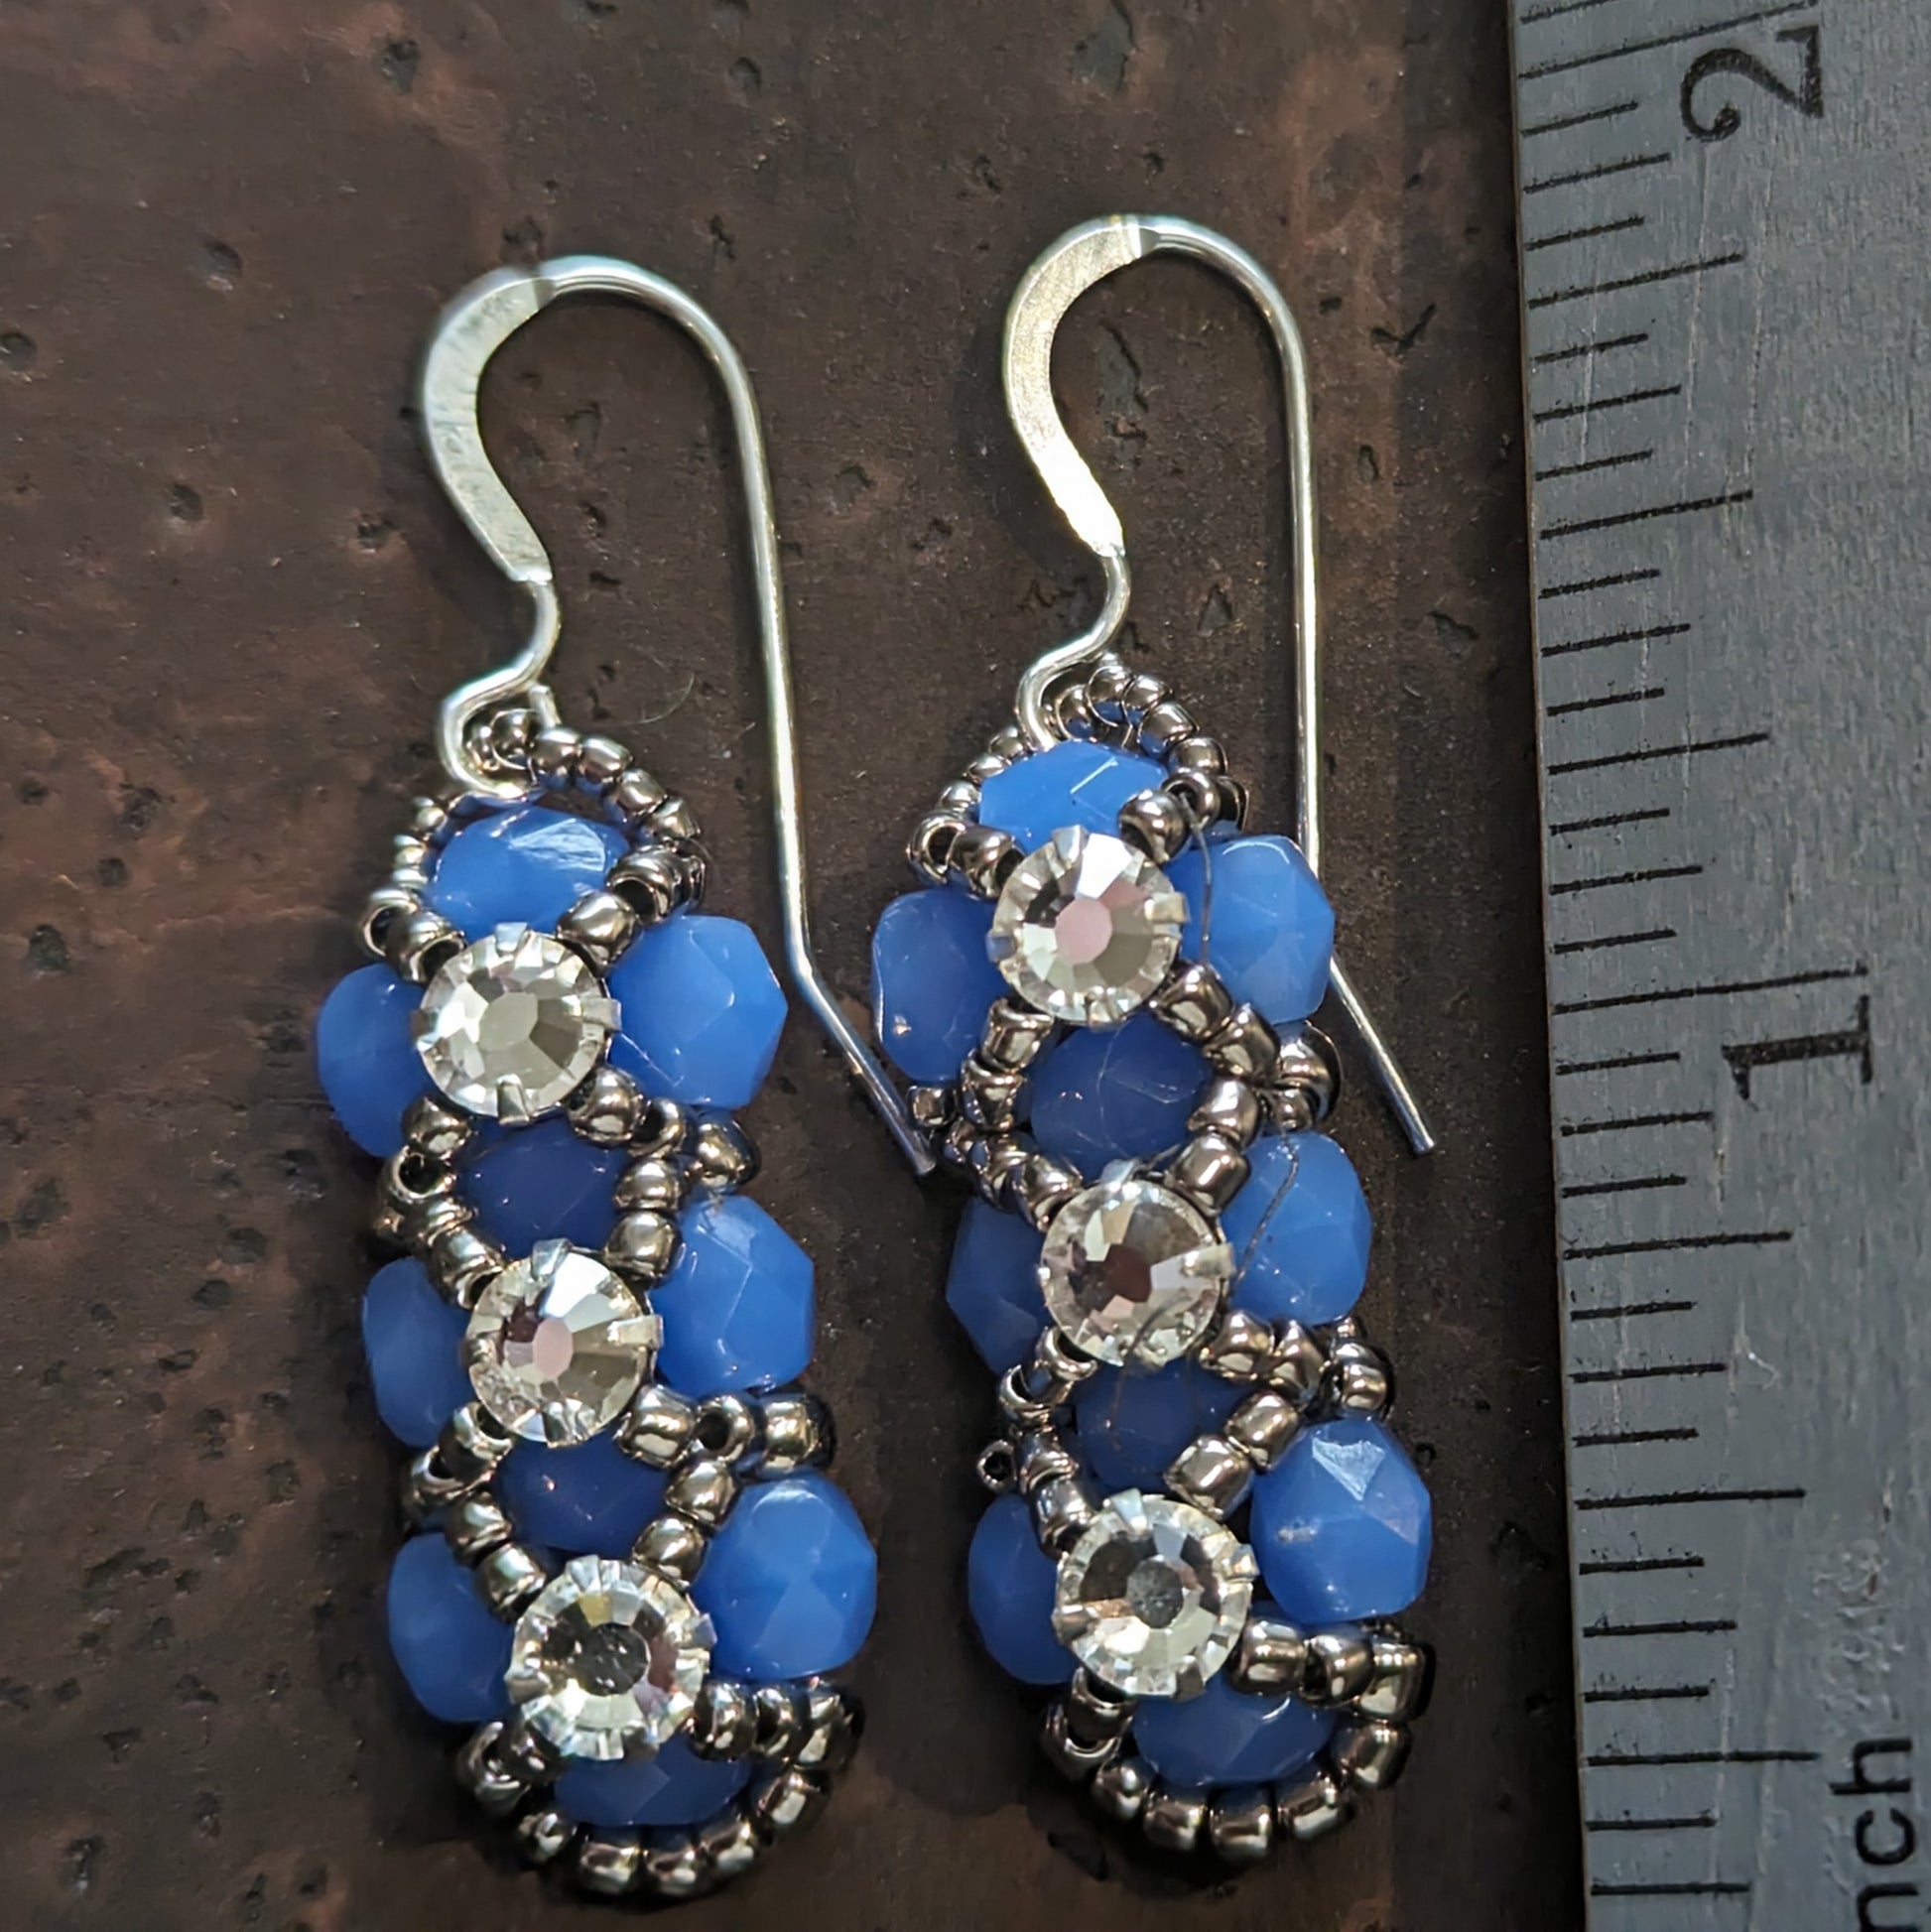 Silver and rich, lightly translucent medium blue earrings on a cork-like dark brown background next to a ruler.. The earrings have a background of blue and there are silver seed beads in x-shape securing three clear rhinestones in a vertical row. The earrings have silver ear wires.